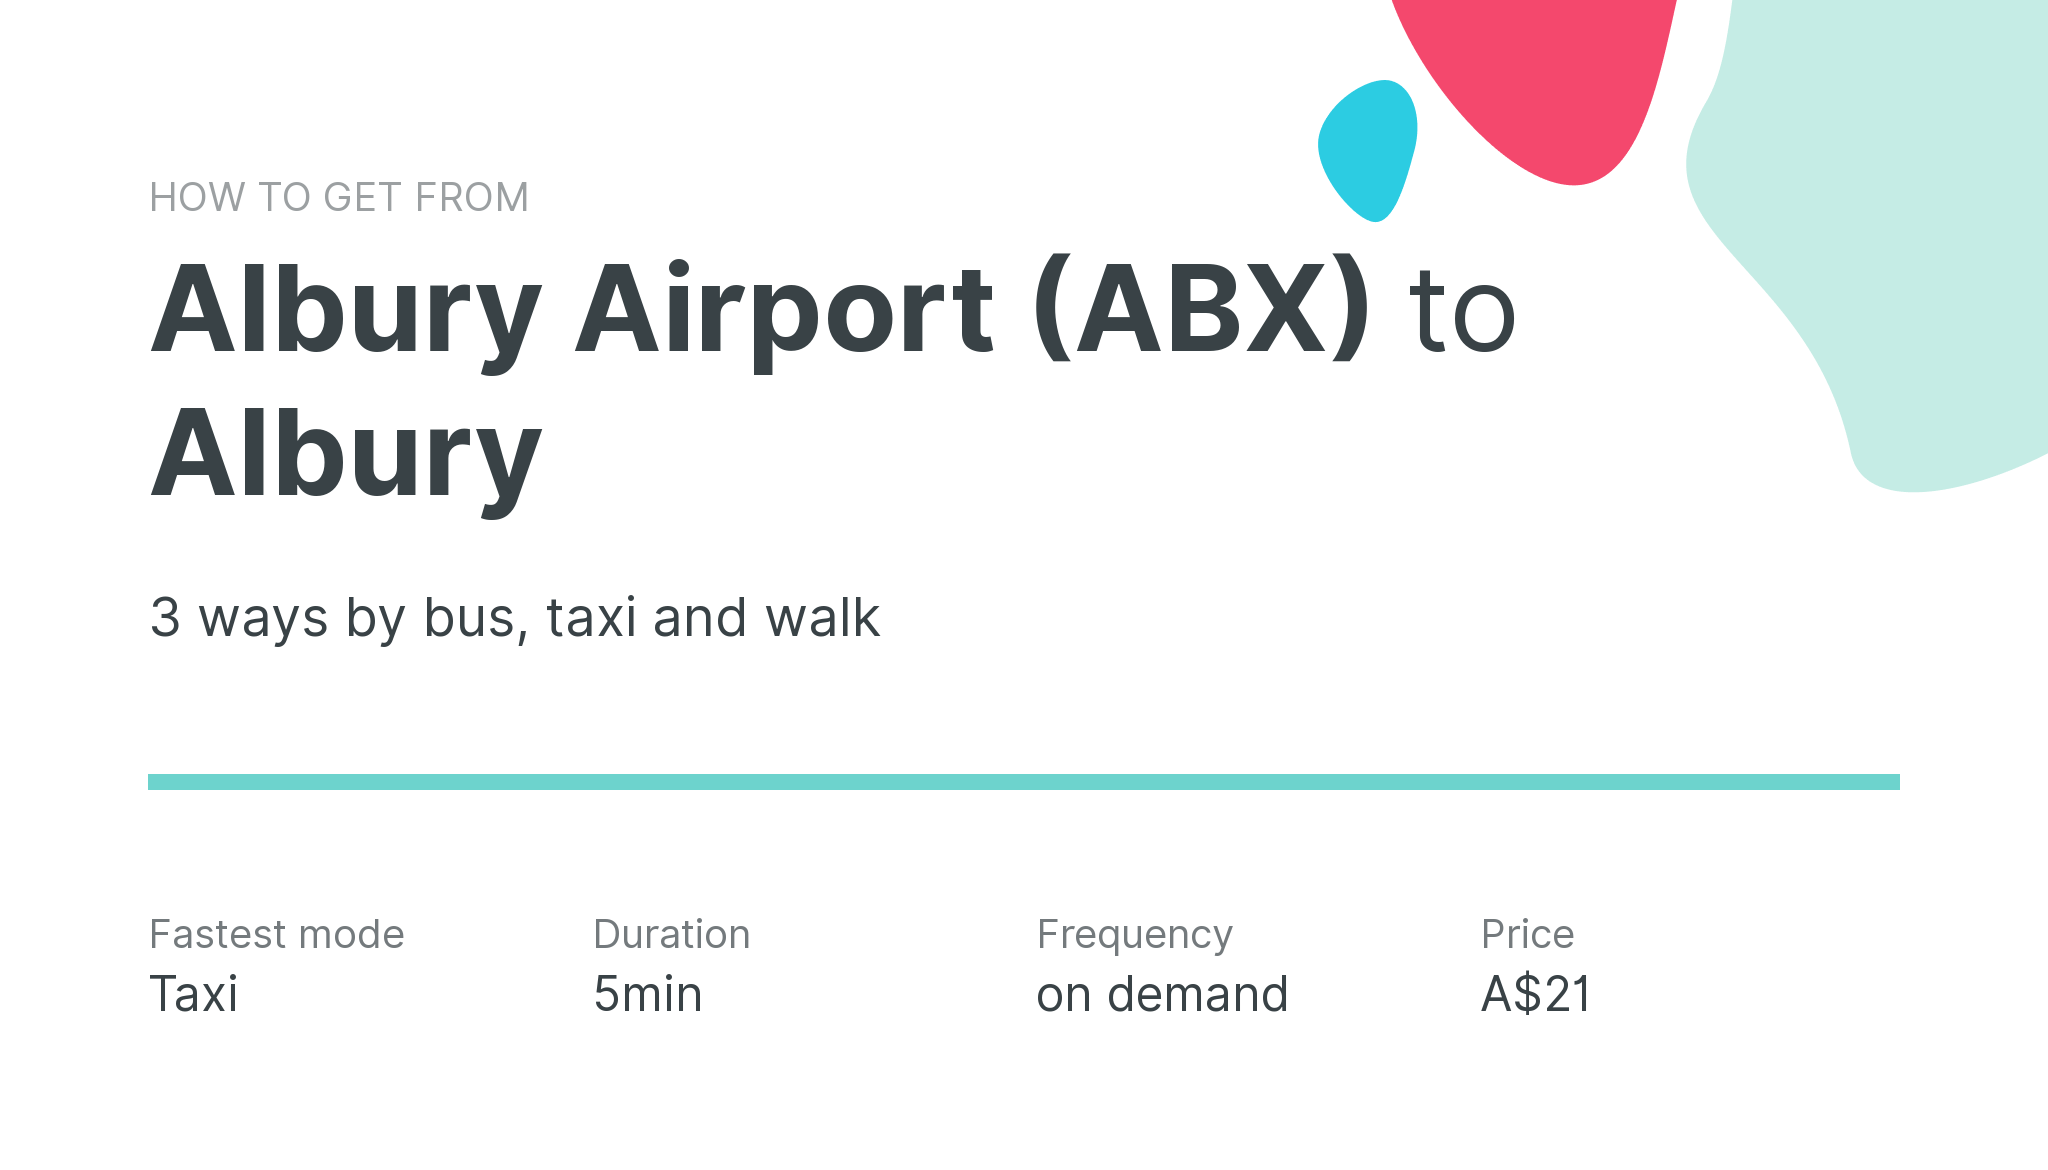 How do I get from Albury Airport (ABX) to Albury